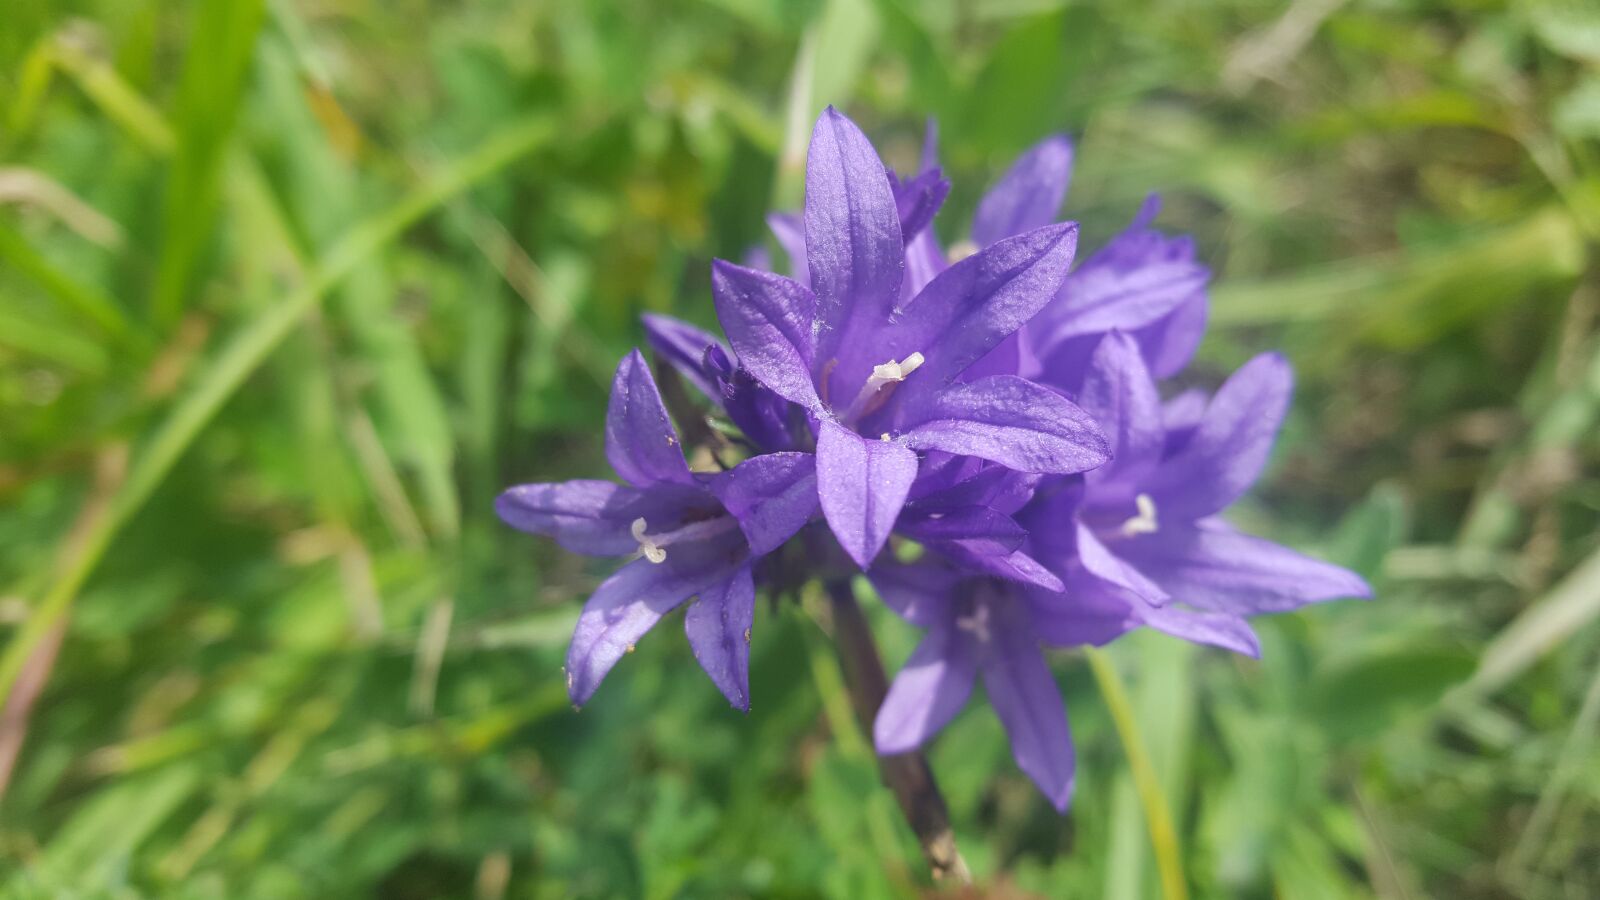 Samsung Galaxy S6 sample photo. Flower, flowers, nature photography